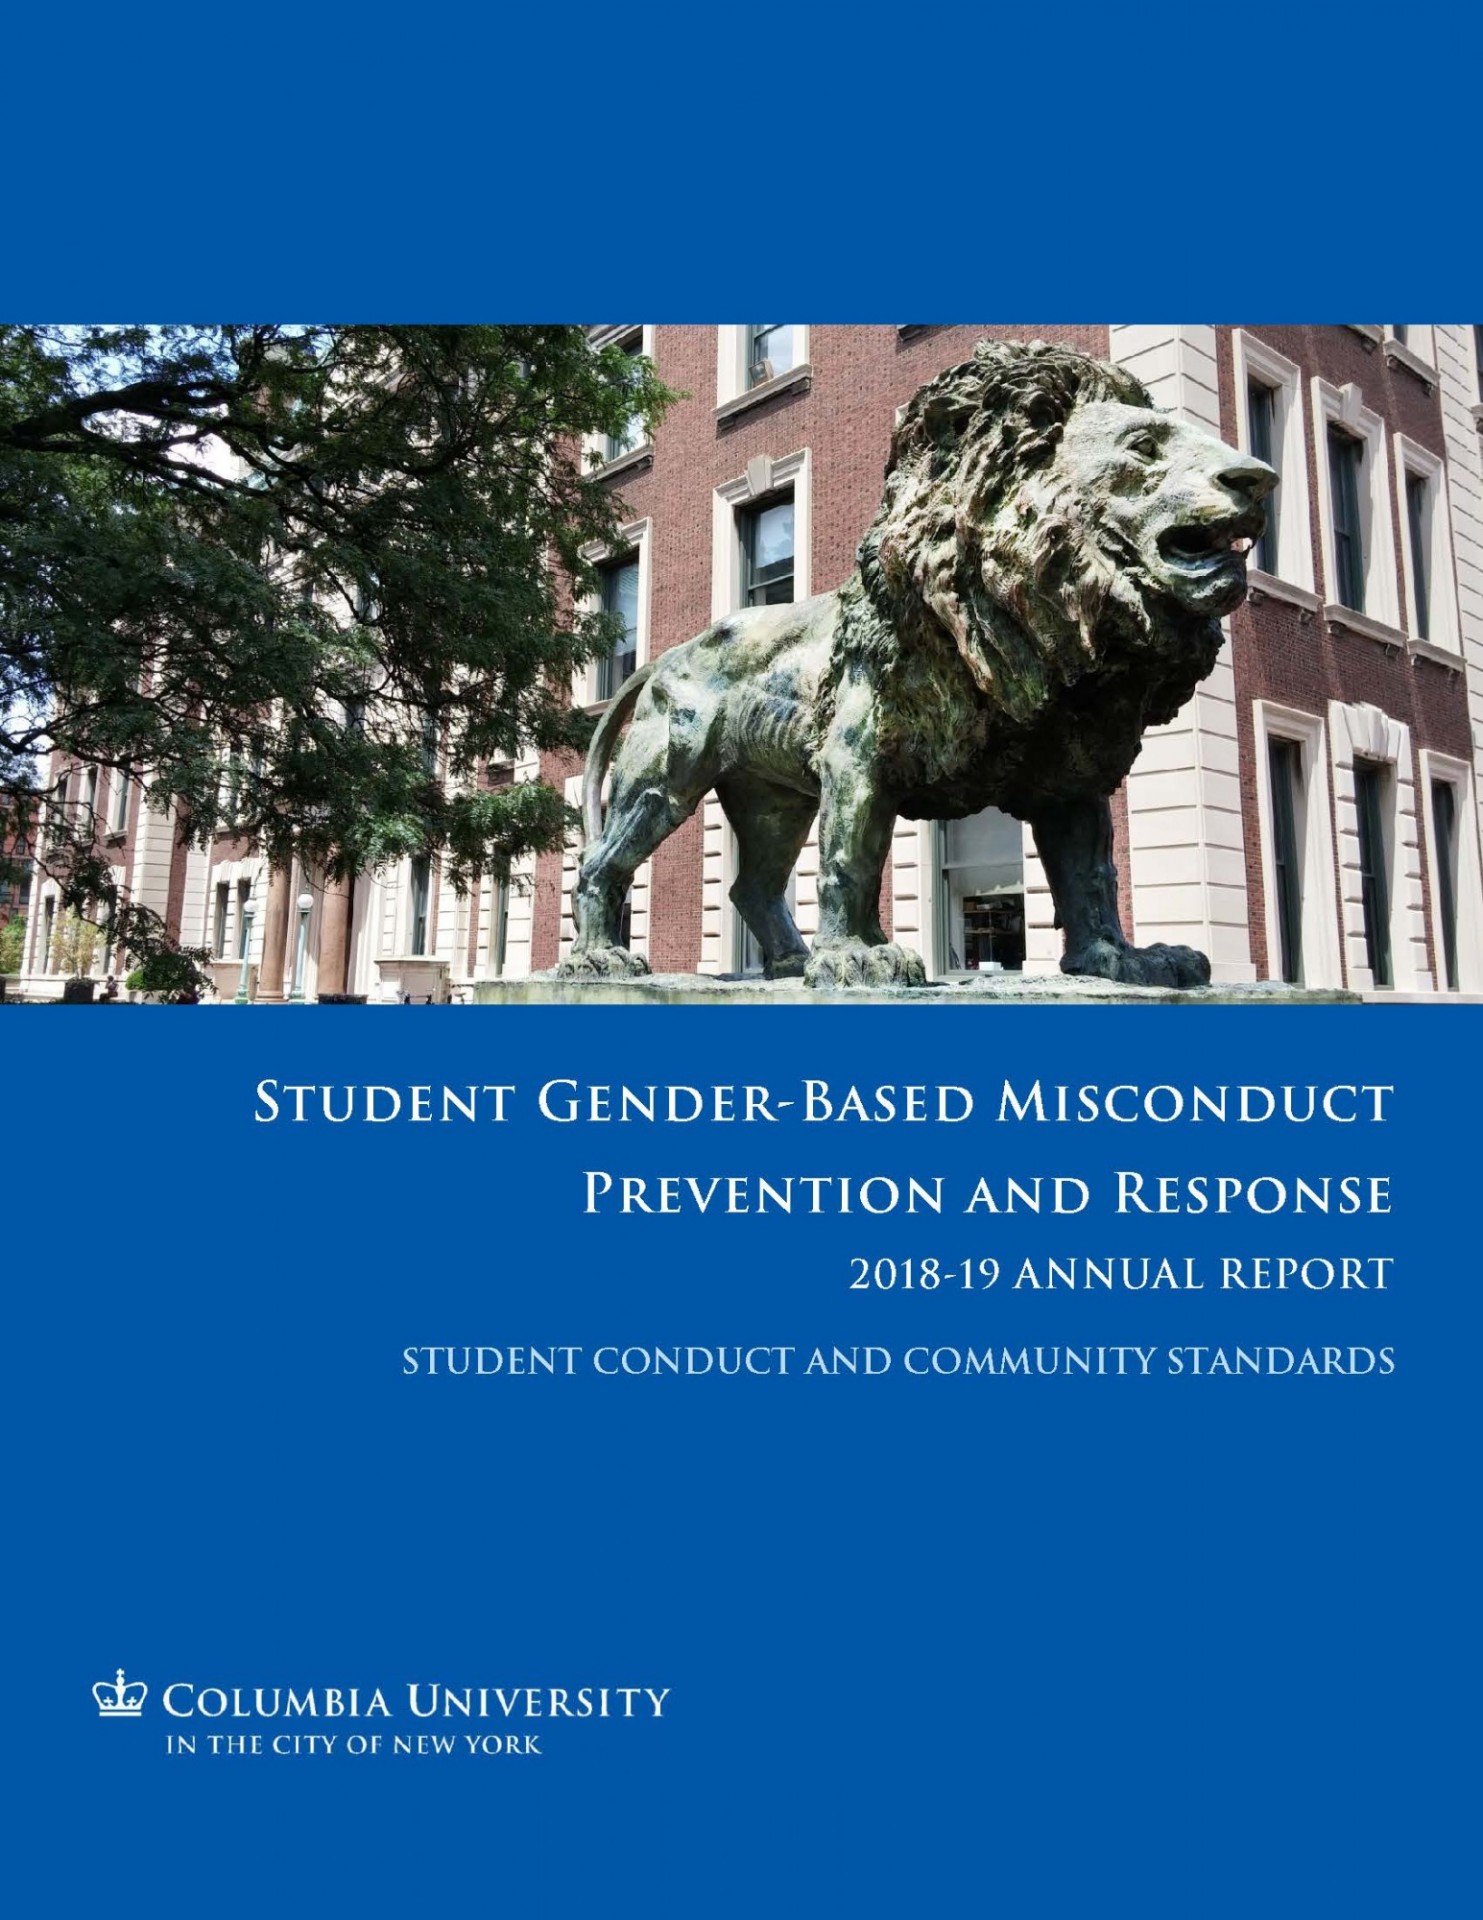 Cover of 2018-19 Report on Gender-Based Misconduct Prevention and Response with image of lion statue